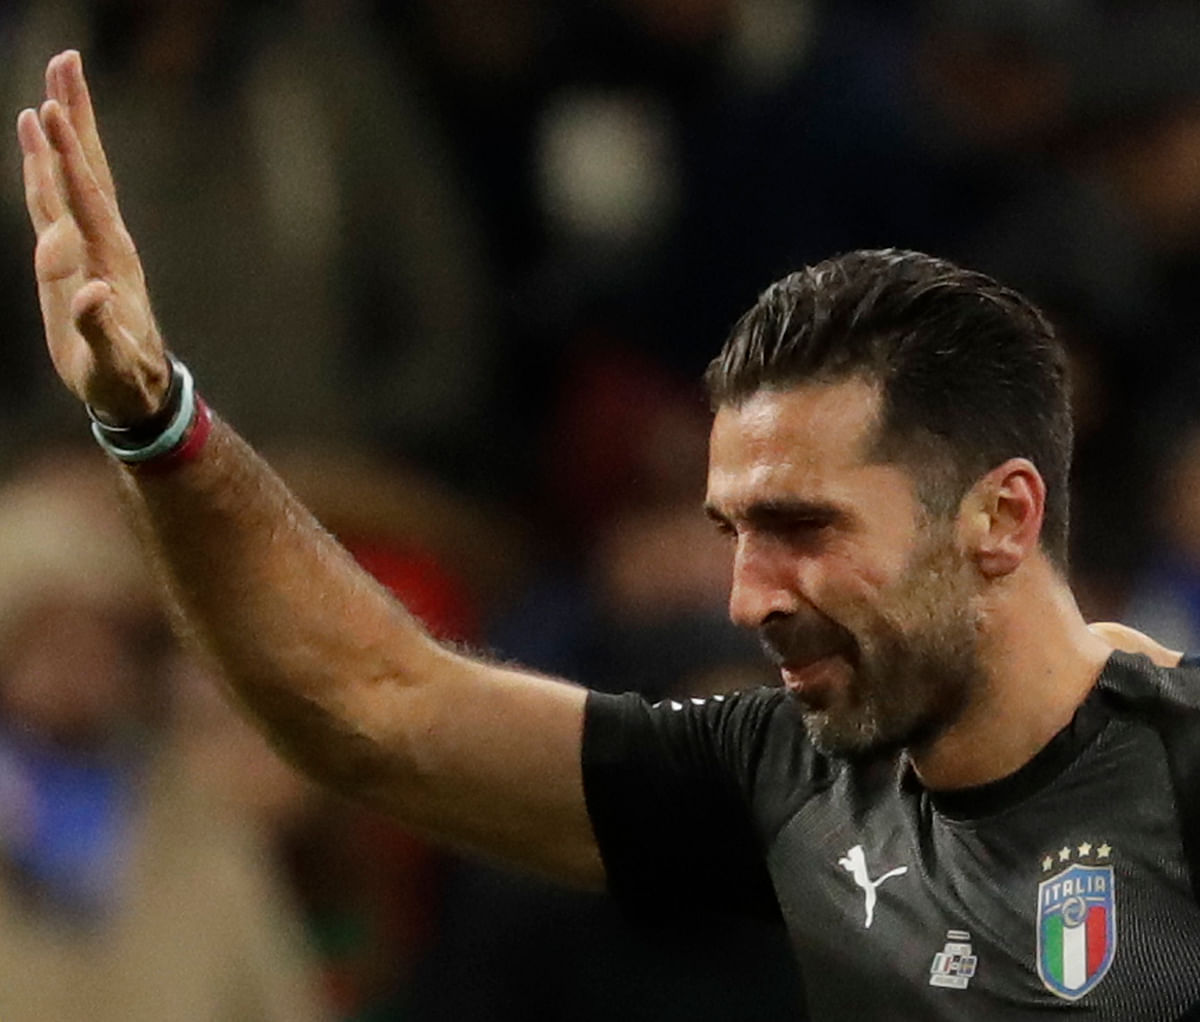 Italy failed to score in both legs of the World Cup qualification playoff.